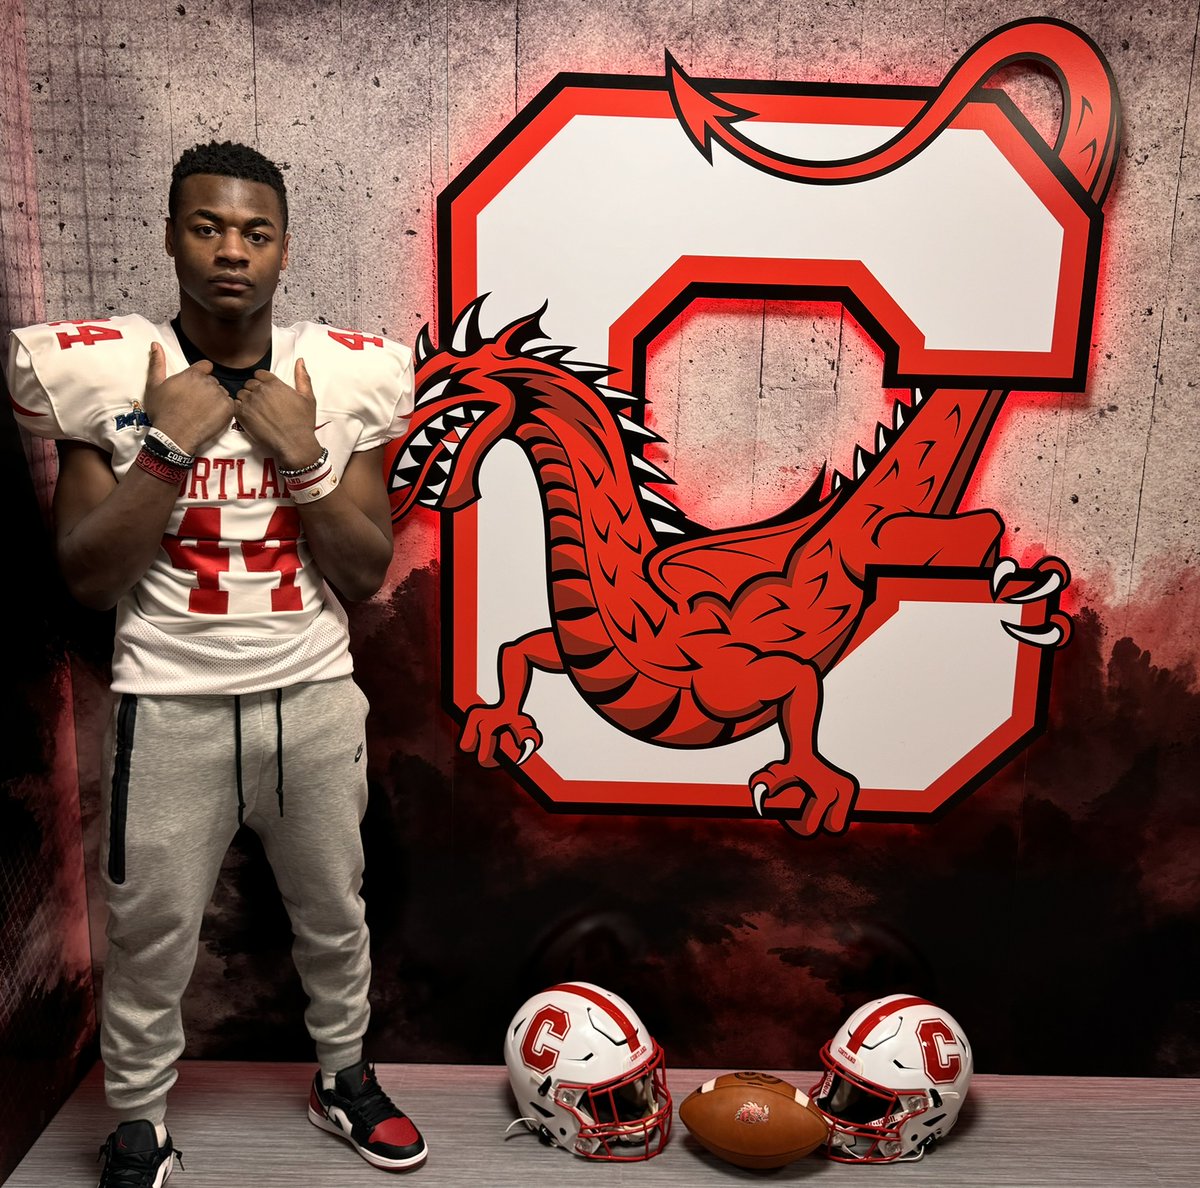 Had a great official visit @CortlandFB yesterday. Thank you @_CoachFitz @coach_foley1 and the entire coaching staff for having me. Excited for the fall - Go Dragons! @coachsamwatts @97RyanJones @JonesKicking @Coach_Radke @CBASyrFootball @brucewill15 @flounderr75 @realcoachbruno1